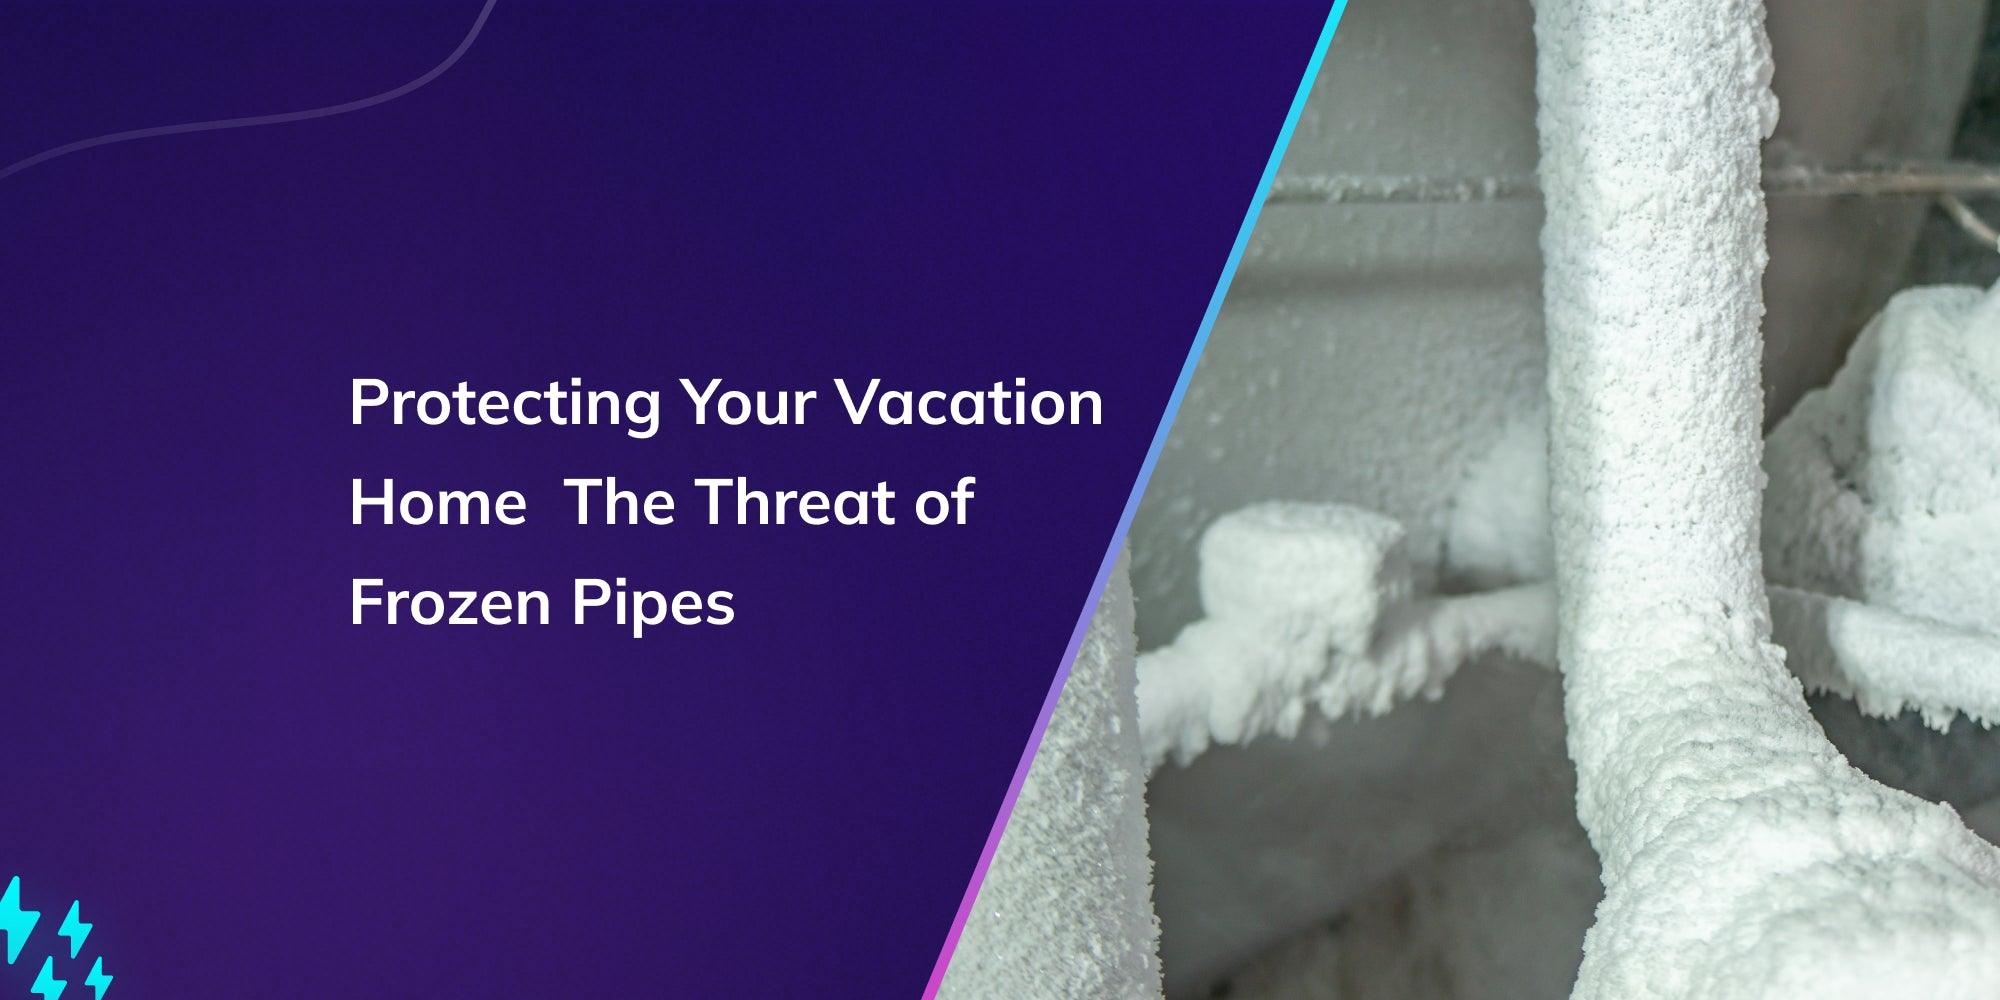 Protecting Your Vacation Home: The Threat of Frozen Pipes